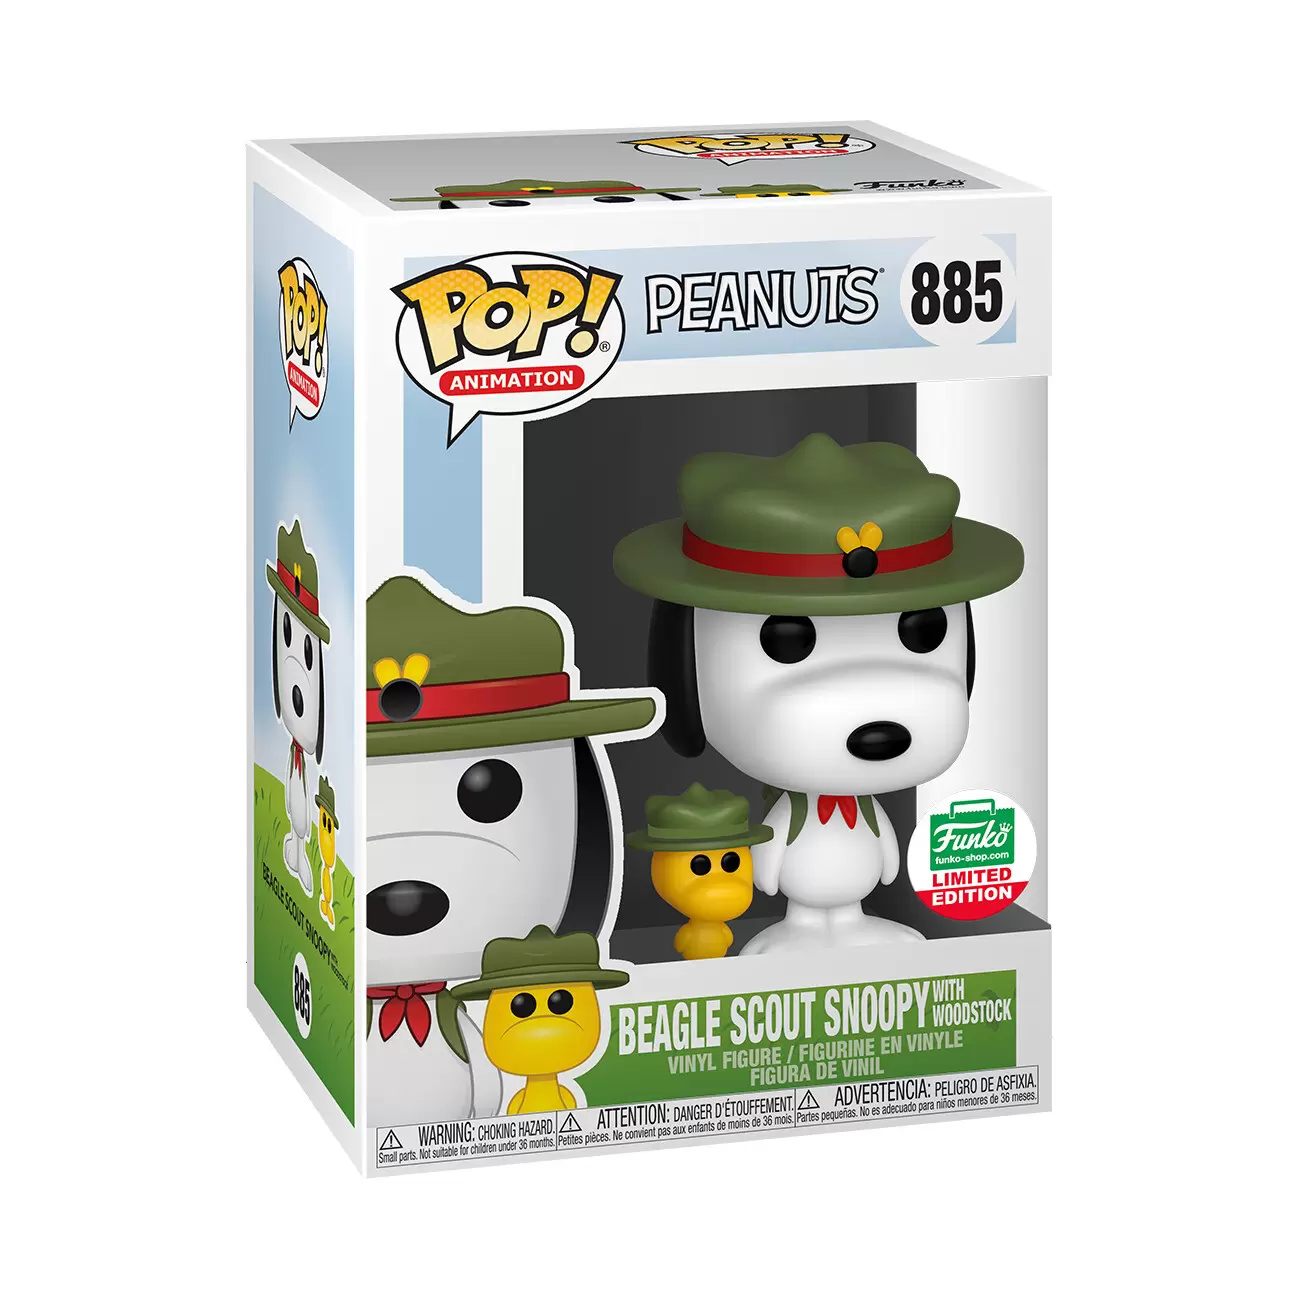 POP! Animation - Peanuts - Beagle Scout Snoopy with Woodstock